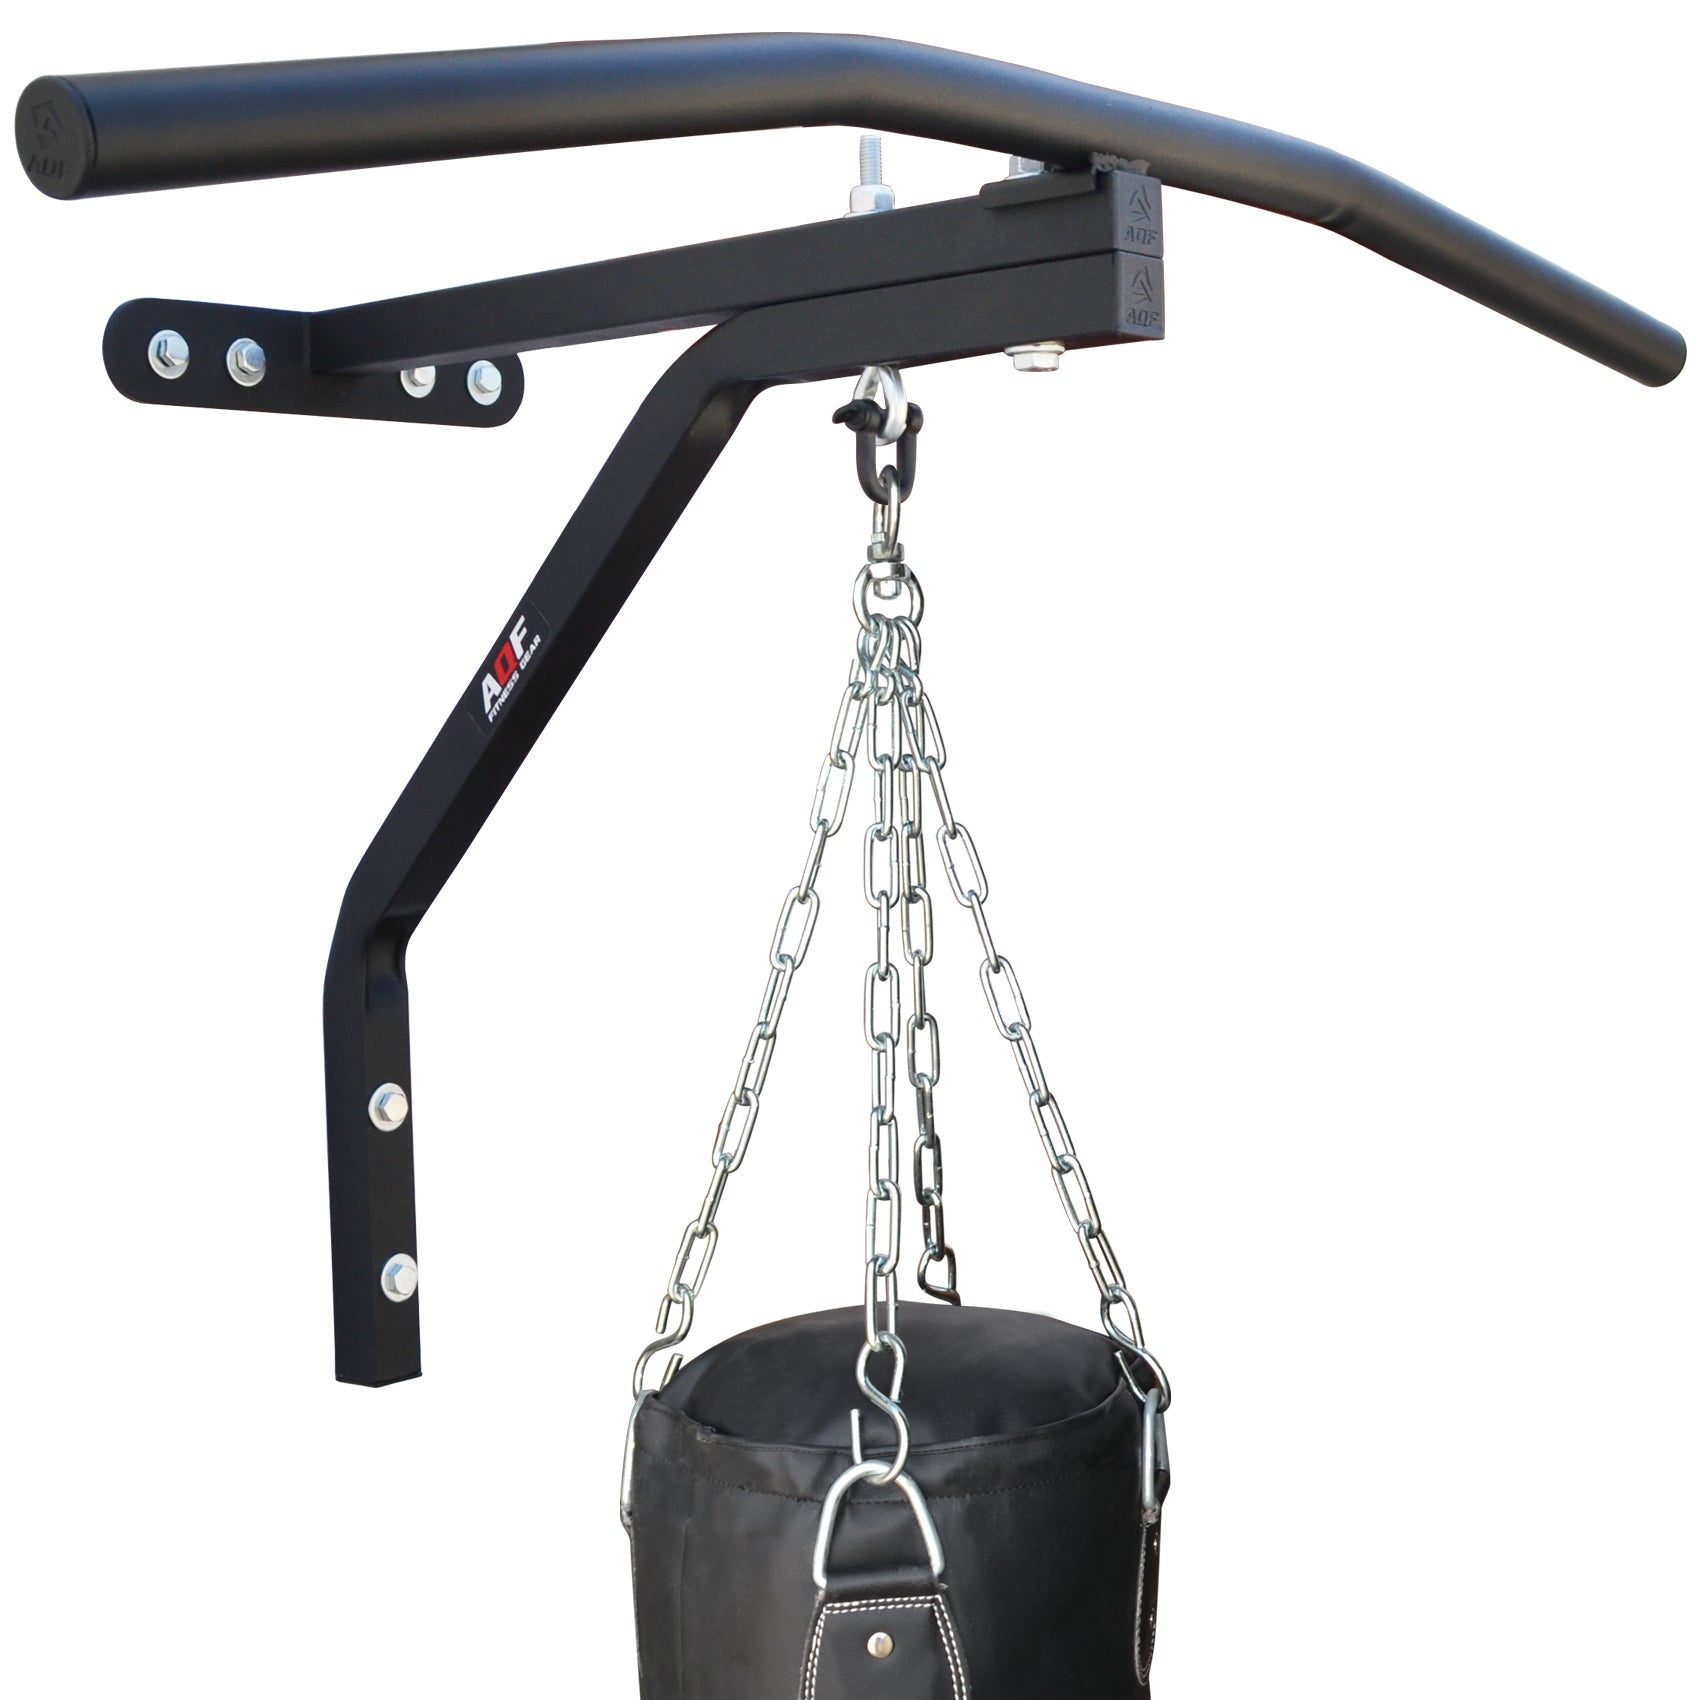 Boxing Bag Stands - Southside Fitness